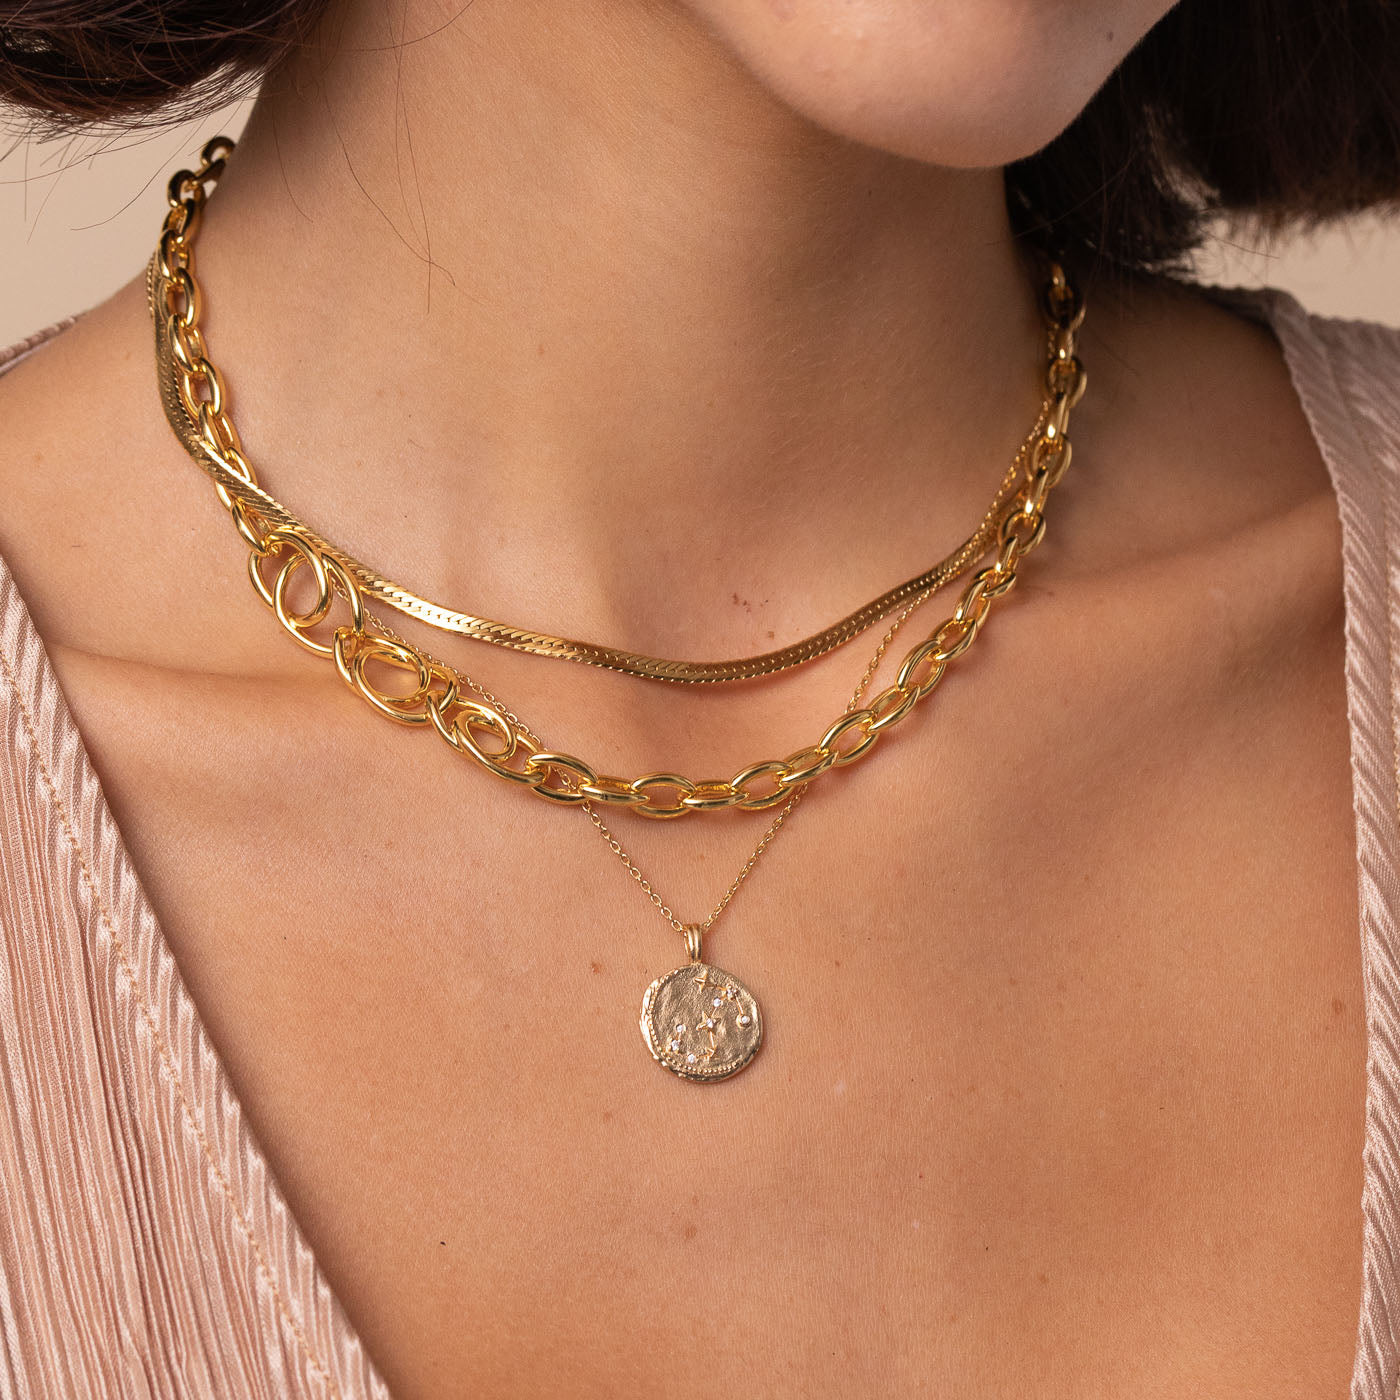 Orbit Chain Necklace in Gold worn layered with necklaces